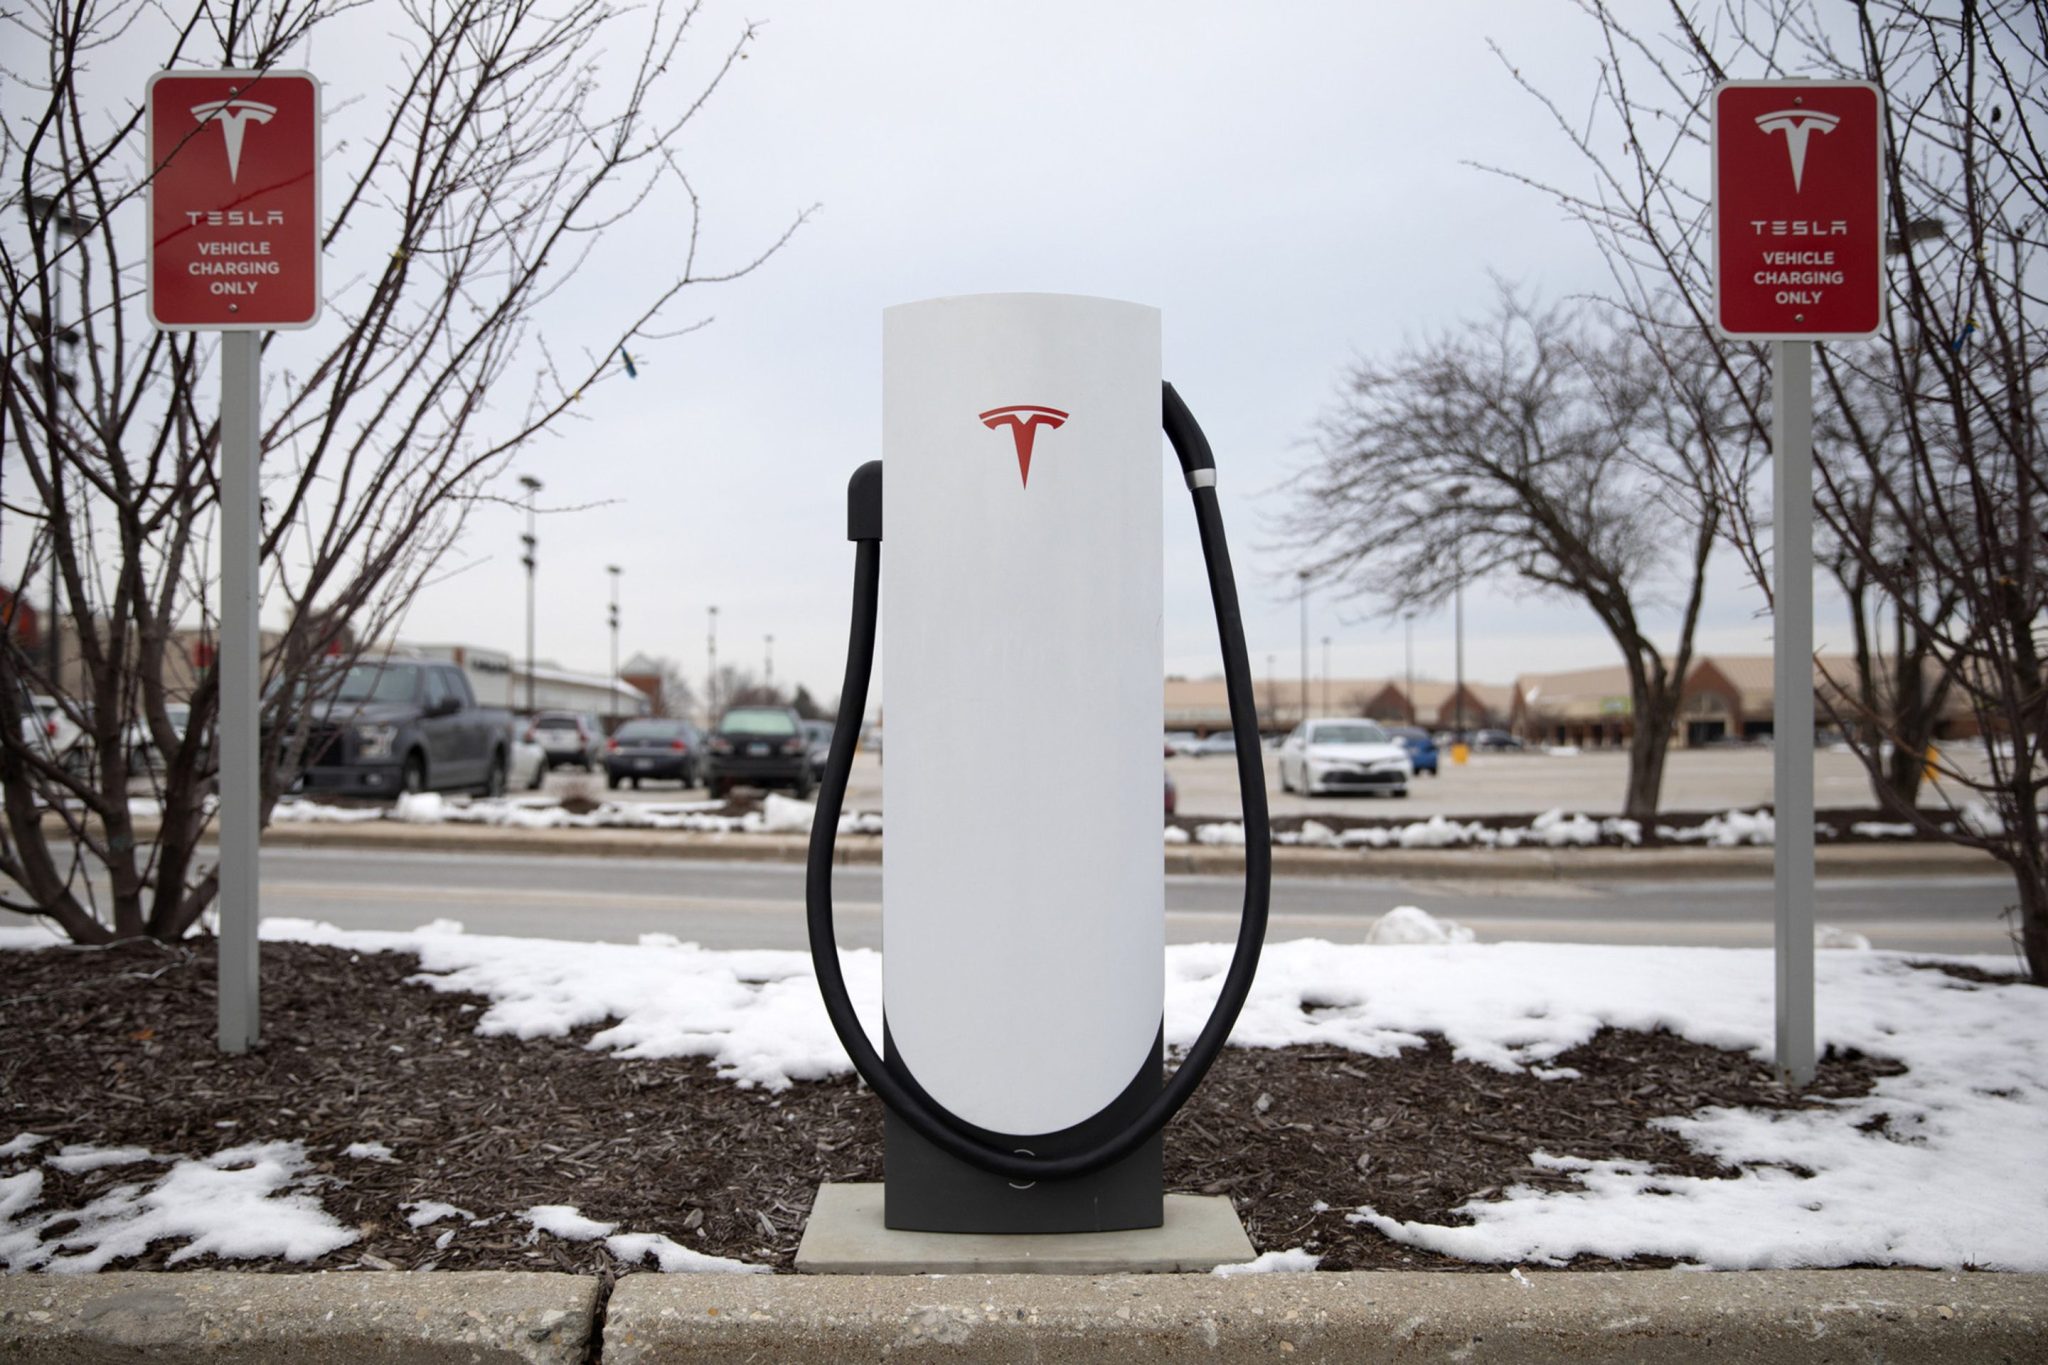 Chicago’s wind gusts prove Elon Musk’s Teslas can’t handle the extreme cold